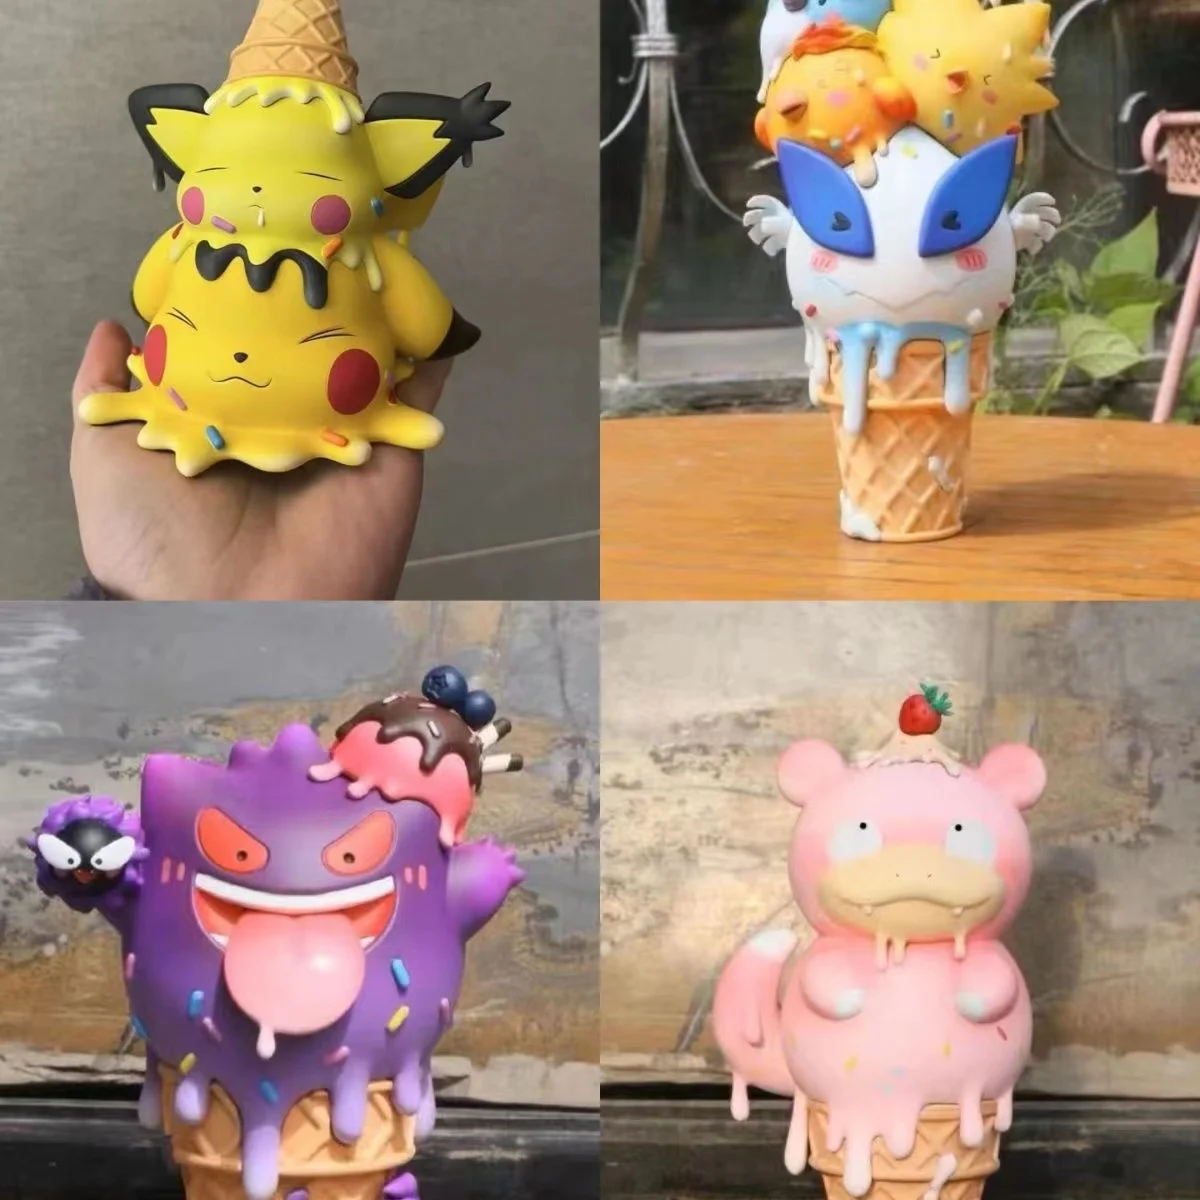 

New Pokemon Pikachu Slowpoke Gengar Ice Cream Series Action Figures Model Toy Cartoon Animal Collectible Ornament Doll Gift For